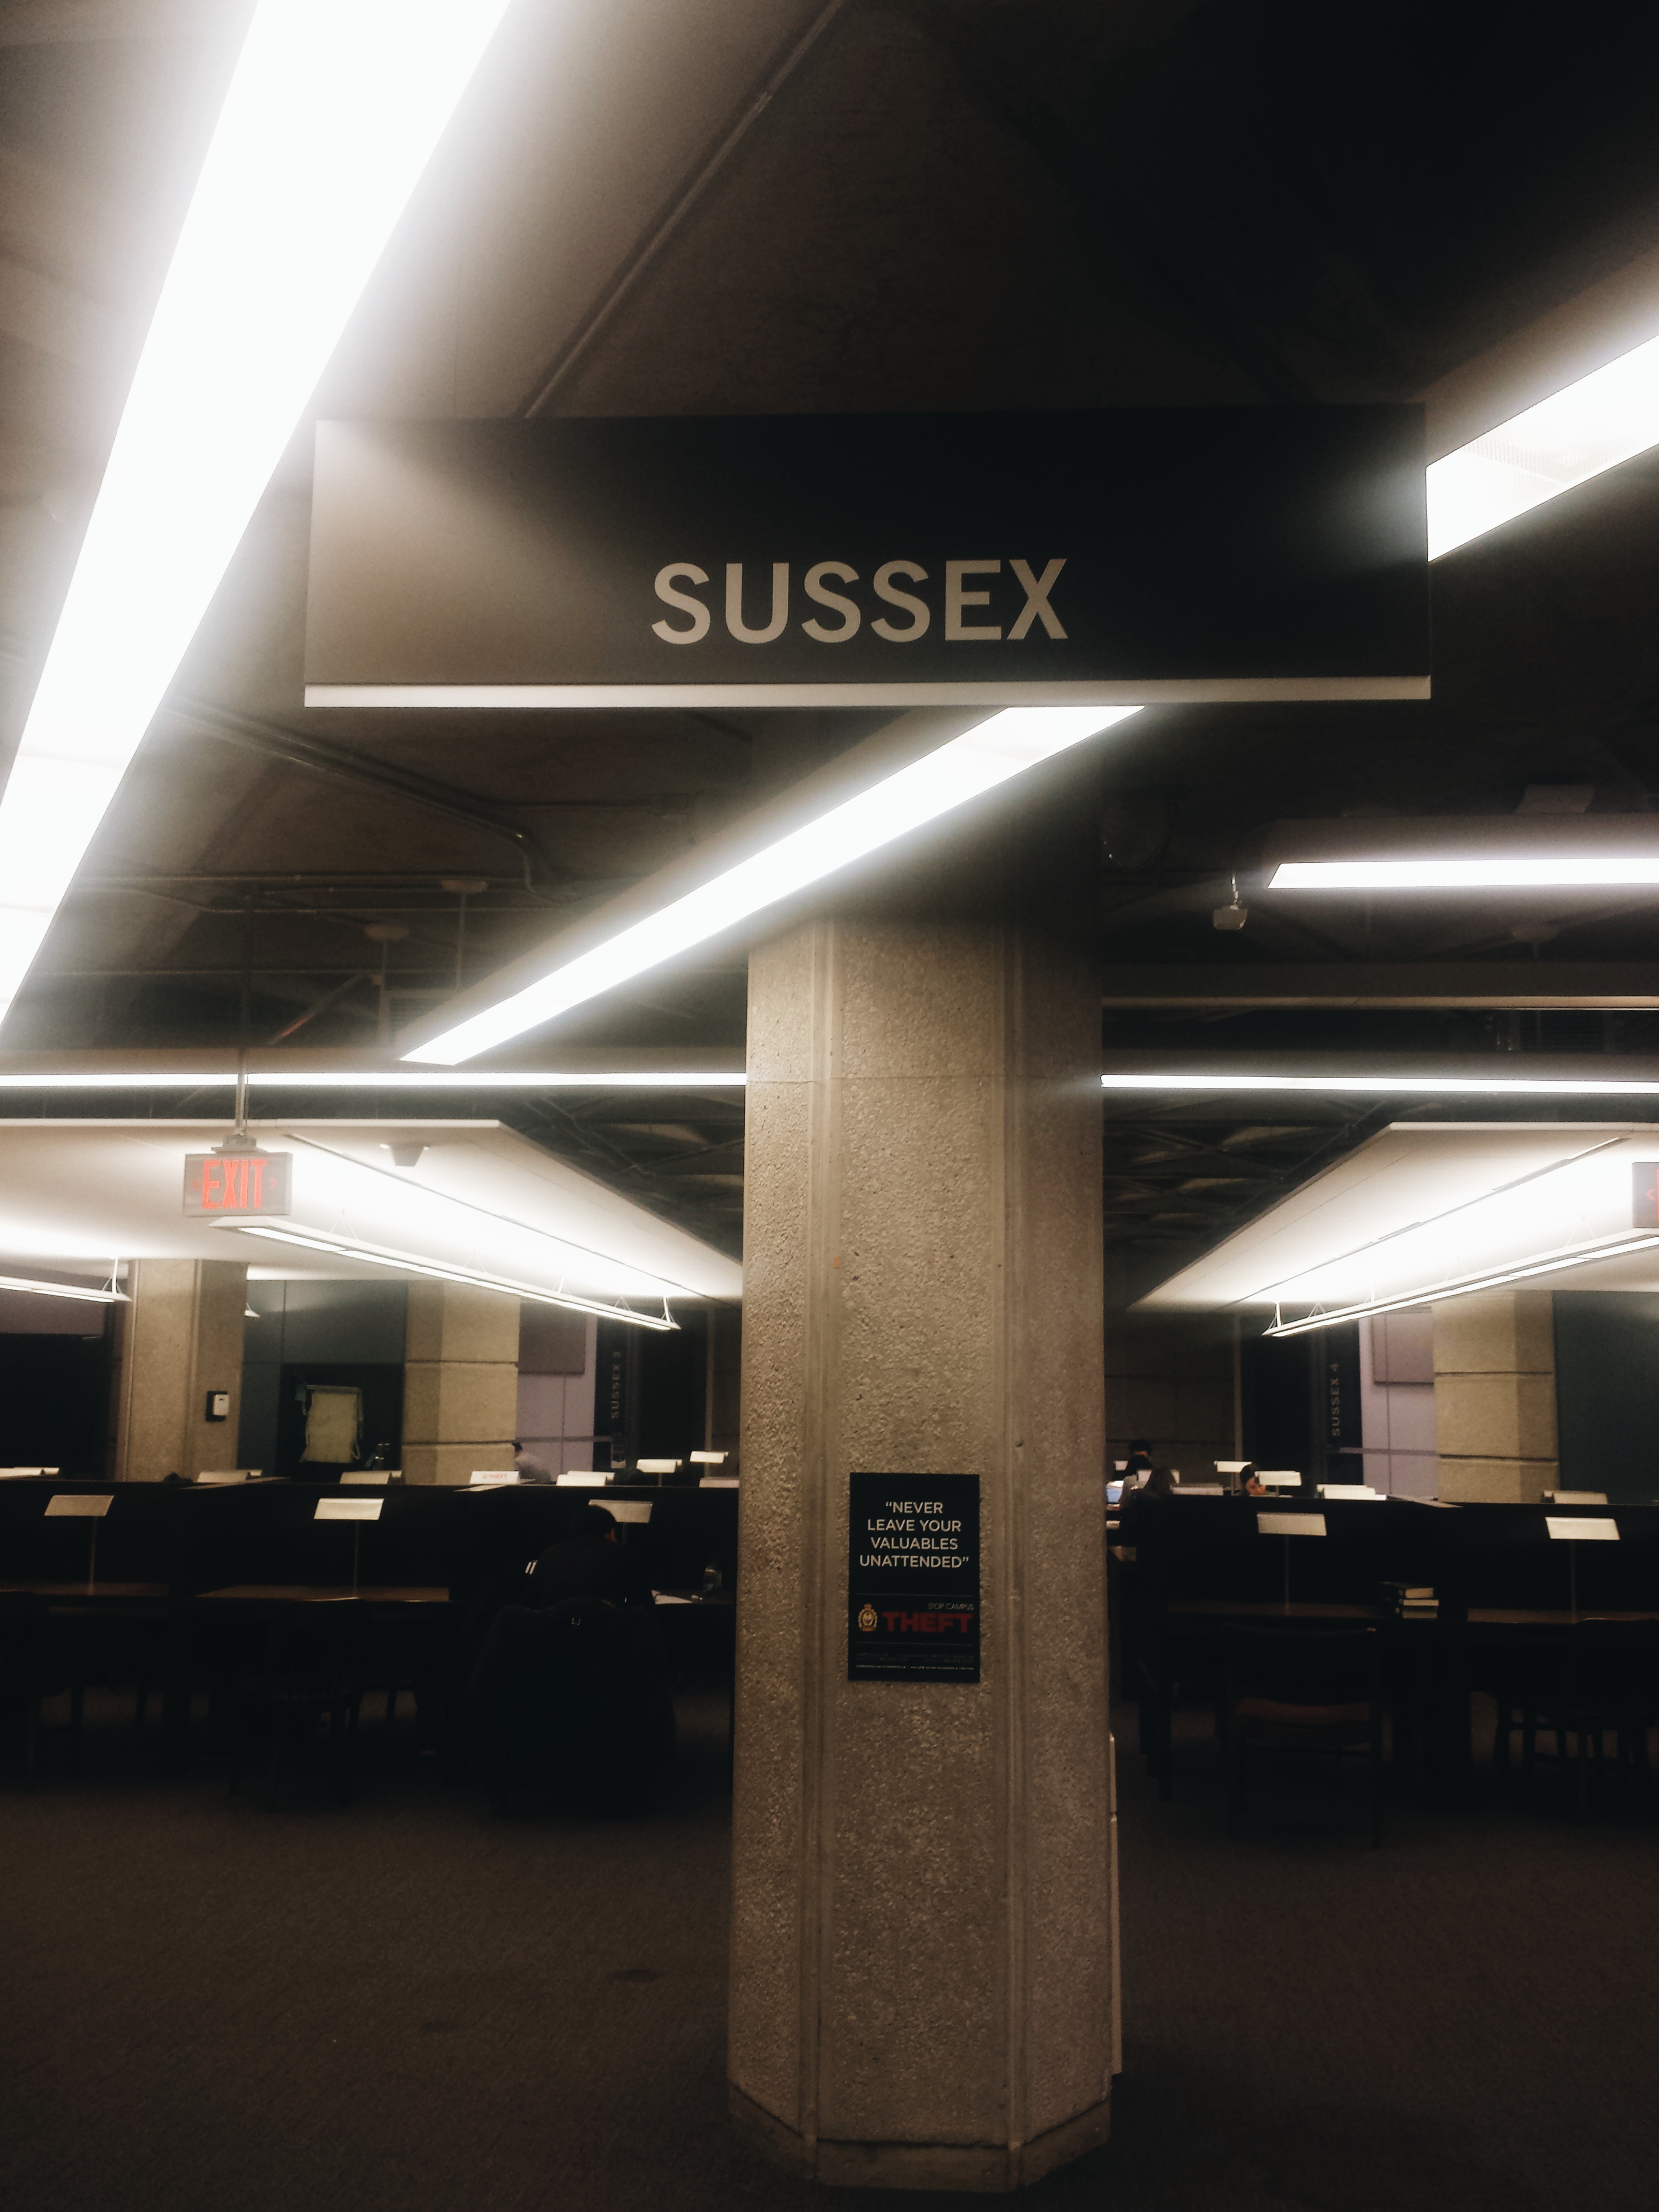 The Sussex sign in Robarts. 